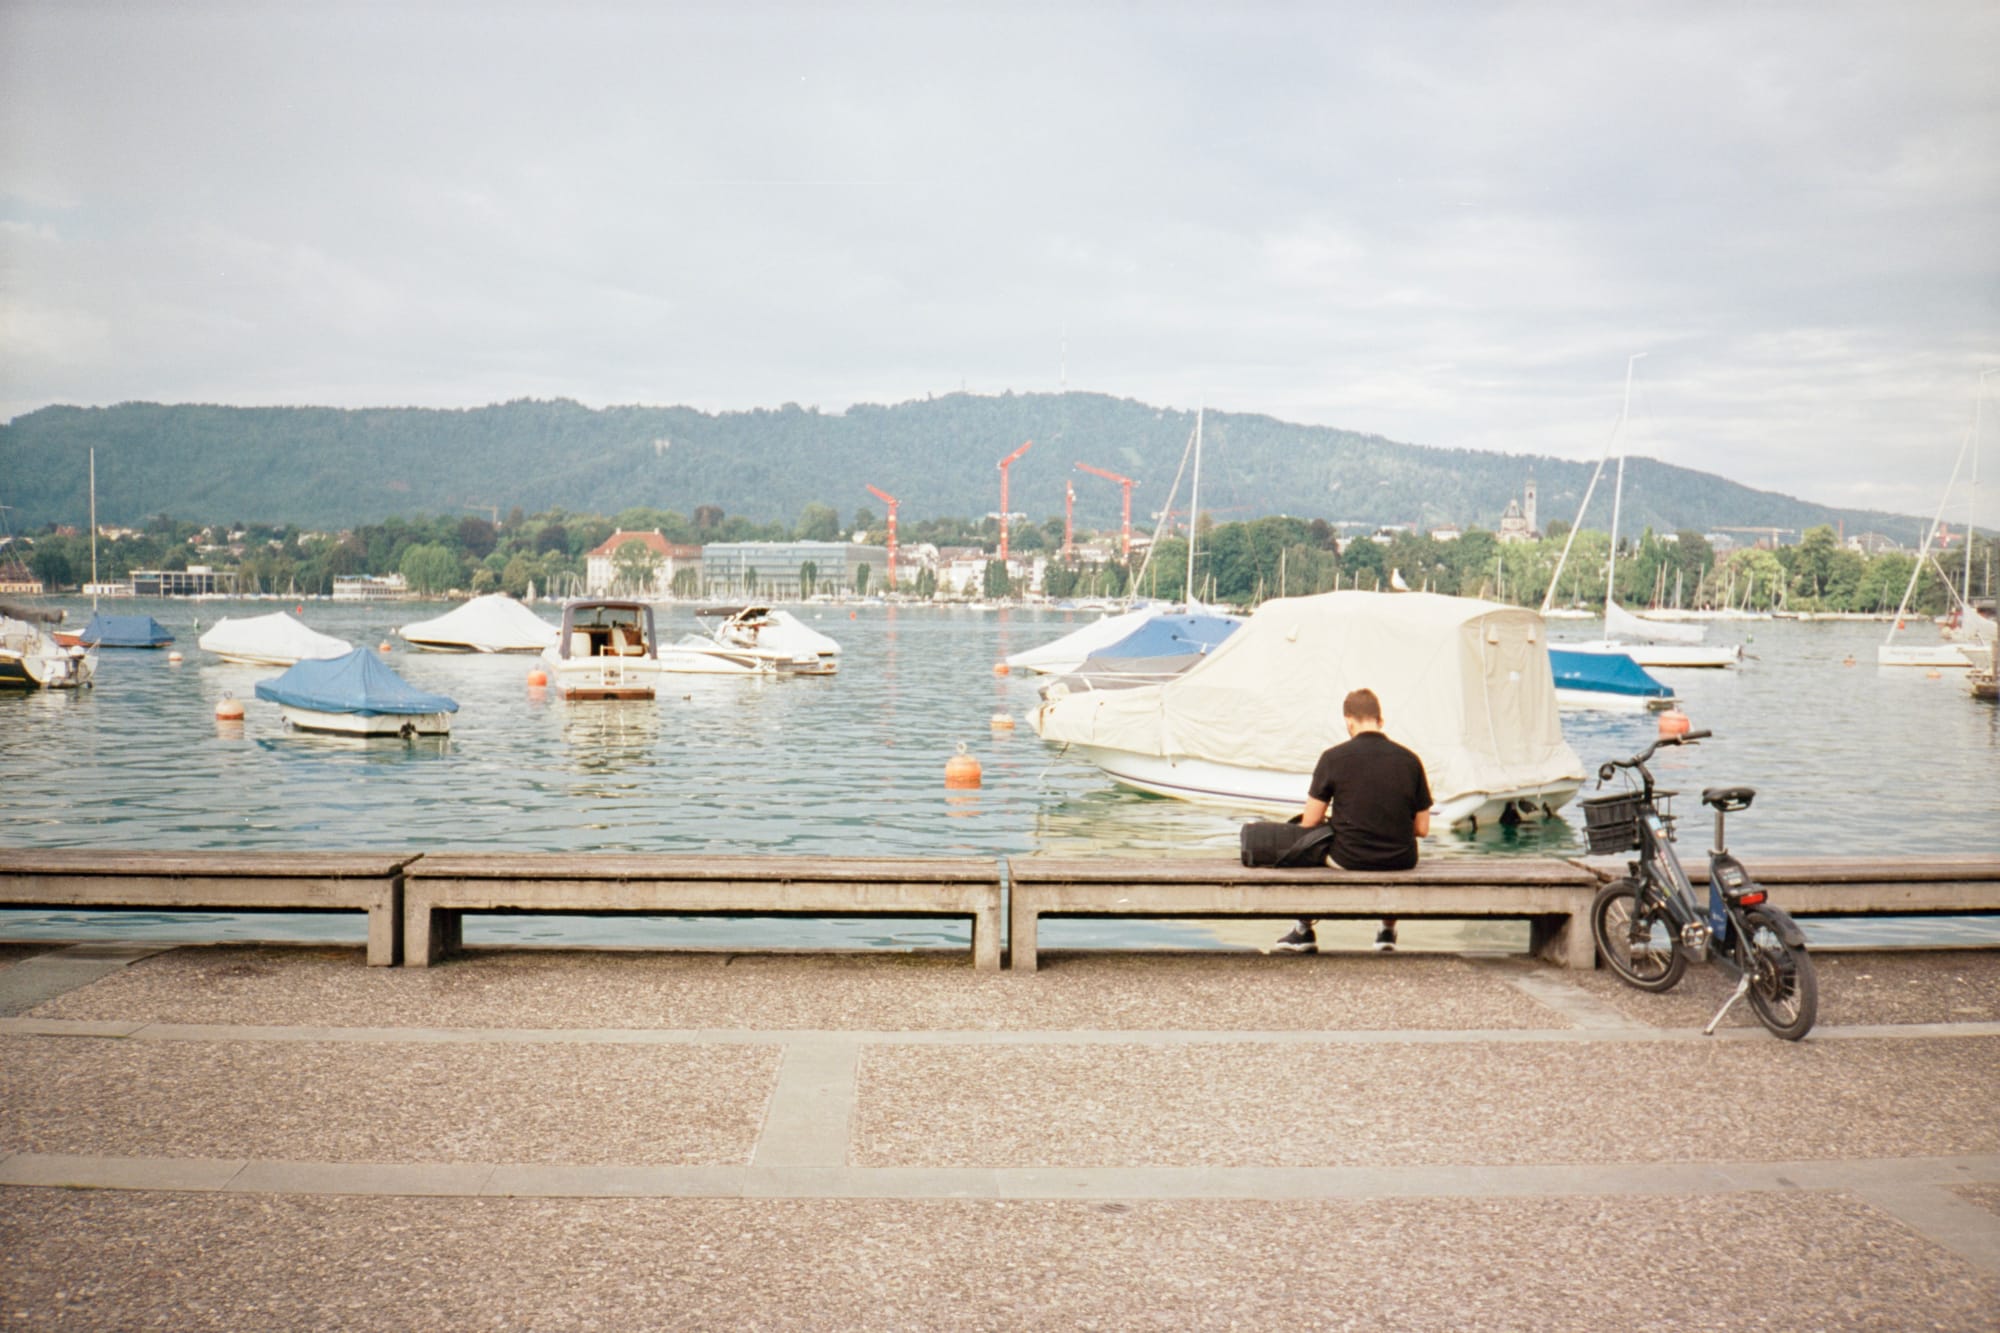 A man in a black t-shirt sits on a bench facing out onto Lake Zürich, reading his phone. His small electric bicycle is on a kickstand nearby. On the lake are tons of small boats and buoys.